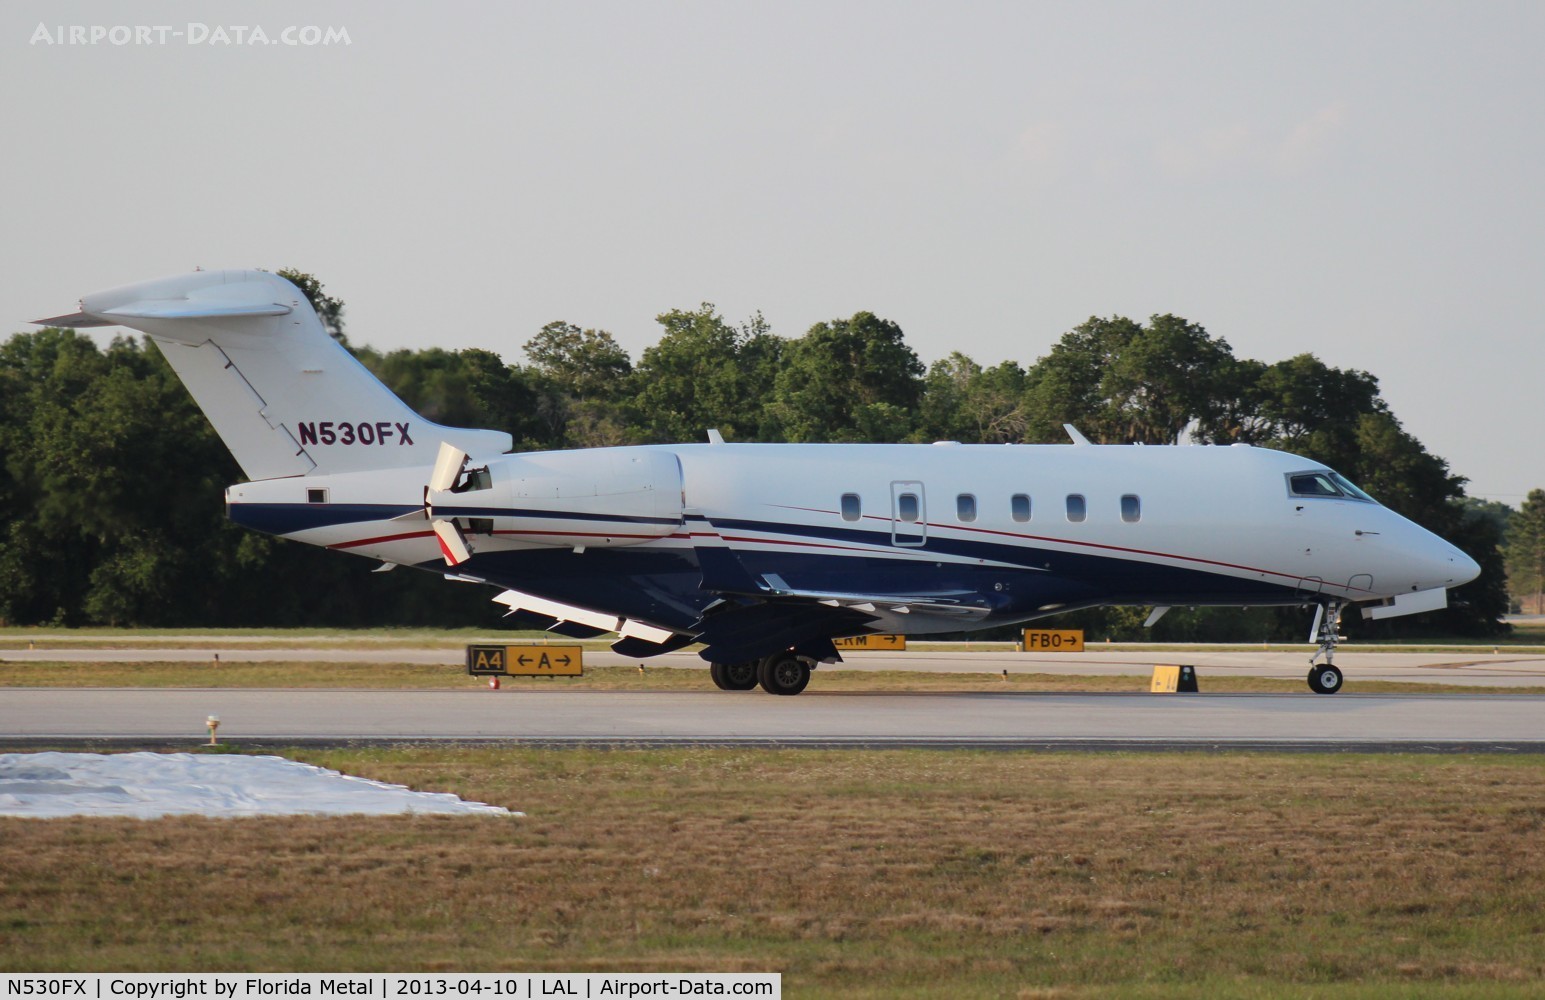 N530FX, 2007 Bombardier Challenger 300 (BD-100-1A10) C/N 20148, Challenger 300